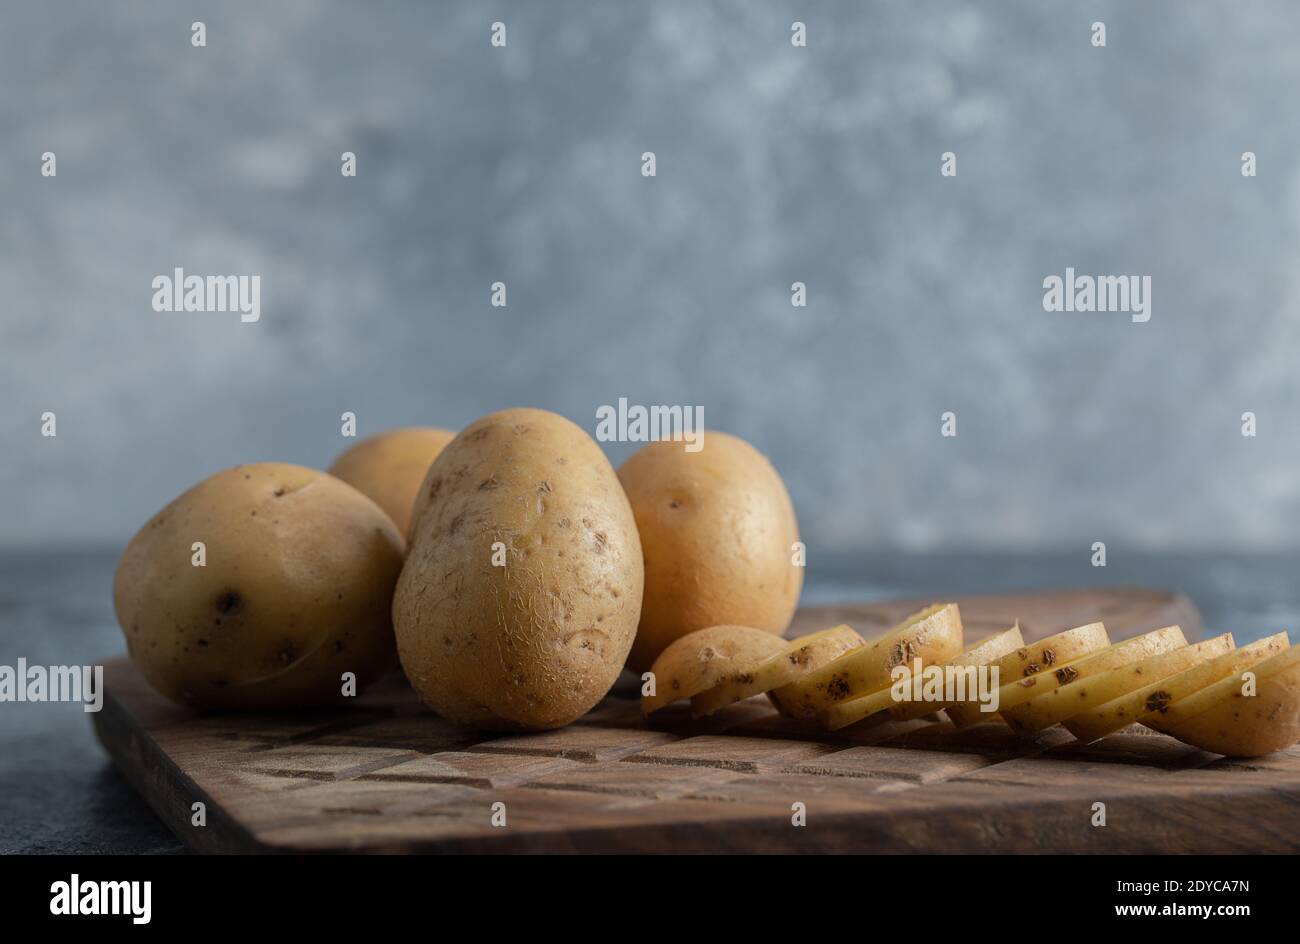 Close up photo of sliced and whole potatoes Stock Photo